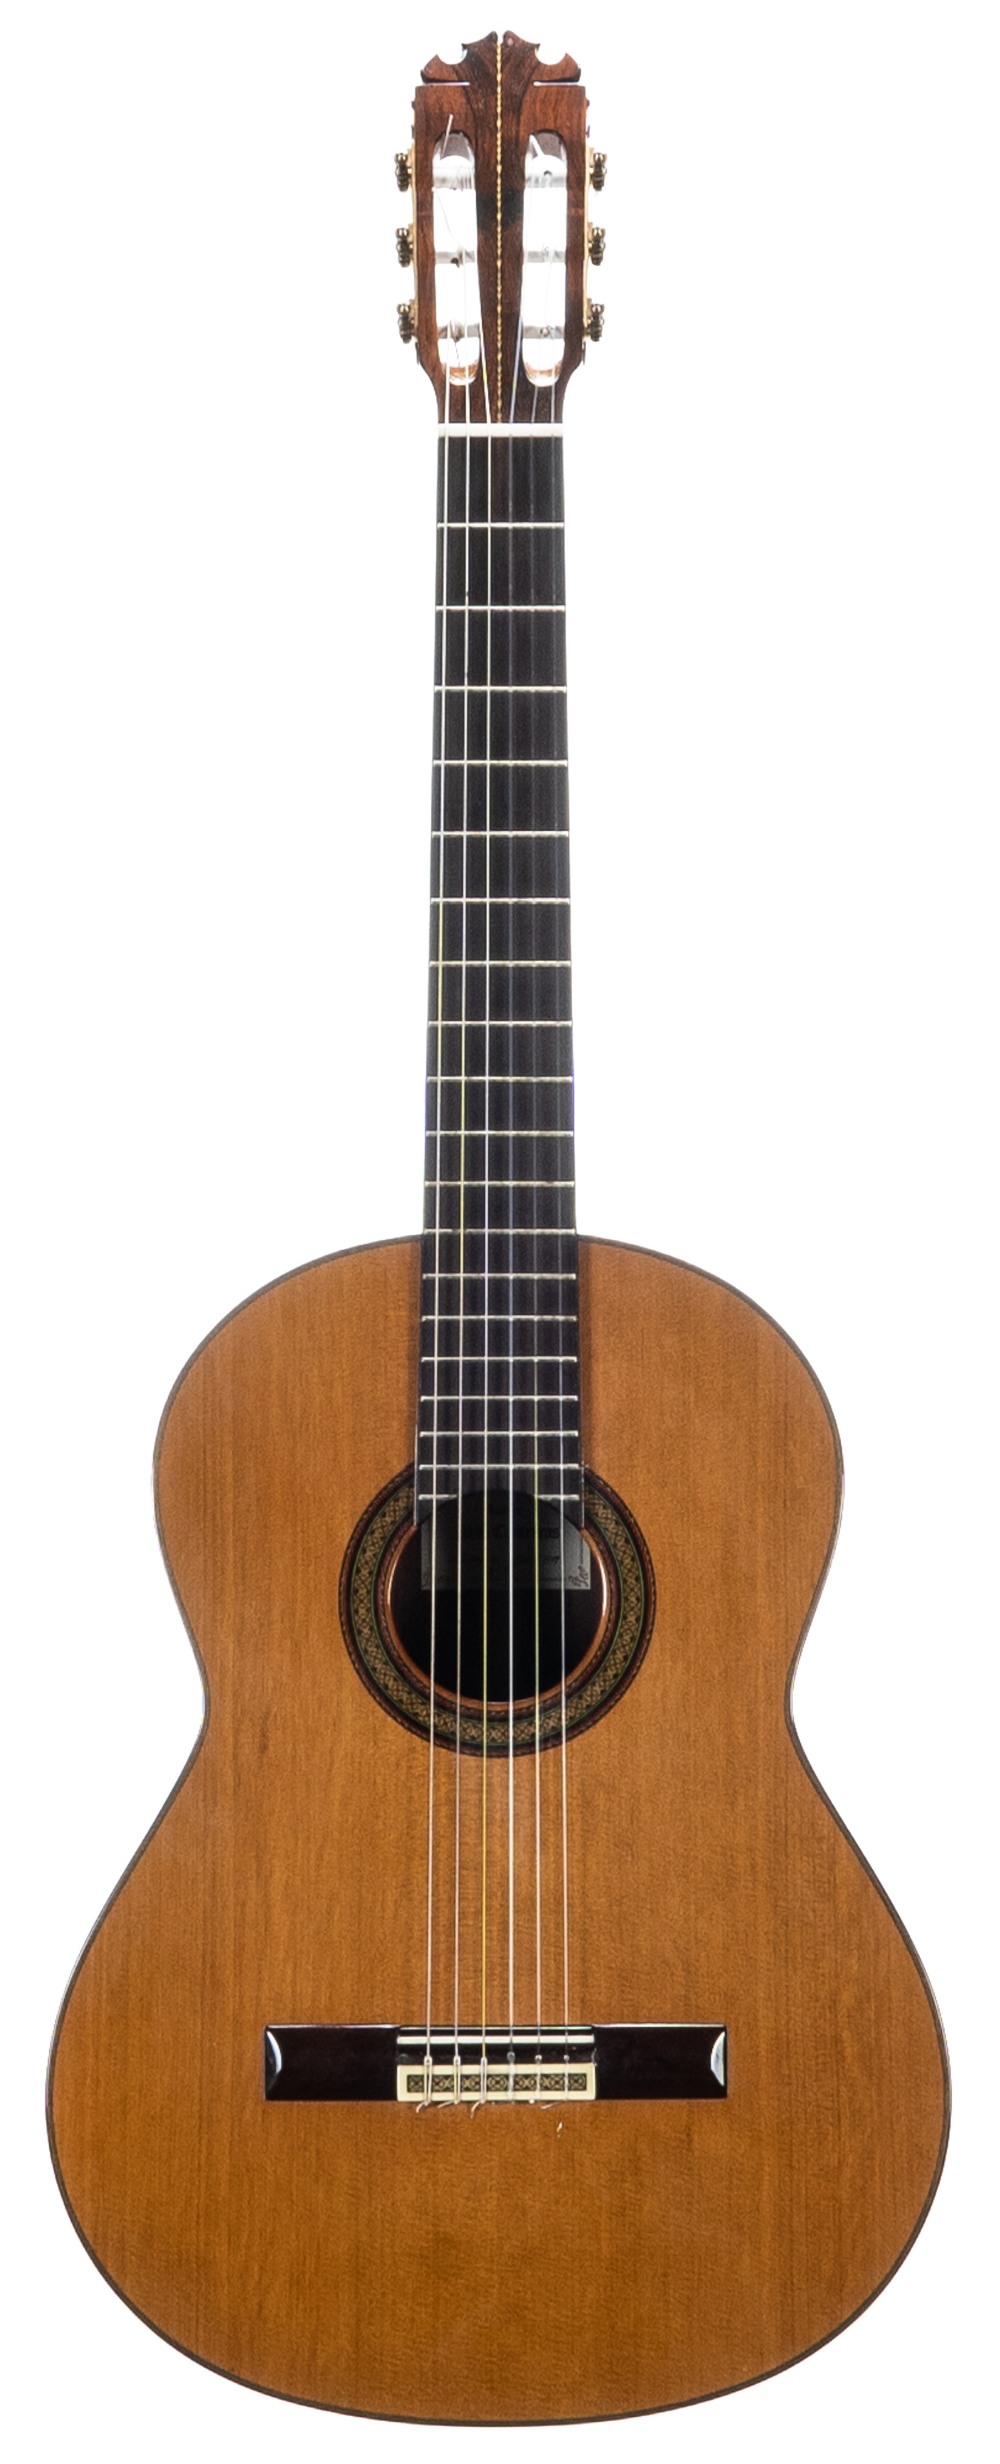 1989 Manuel Contreras guitar, inscribed no. 2 to the label; Back and sides: Indian rosewood;